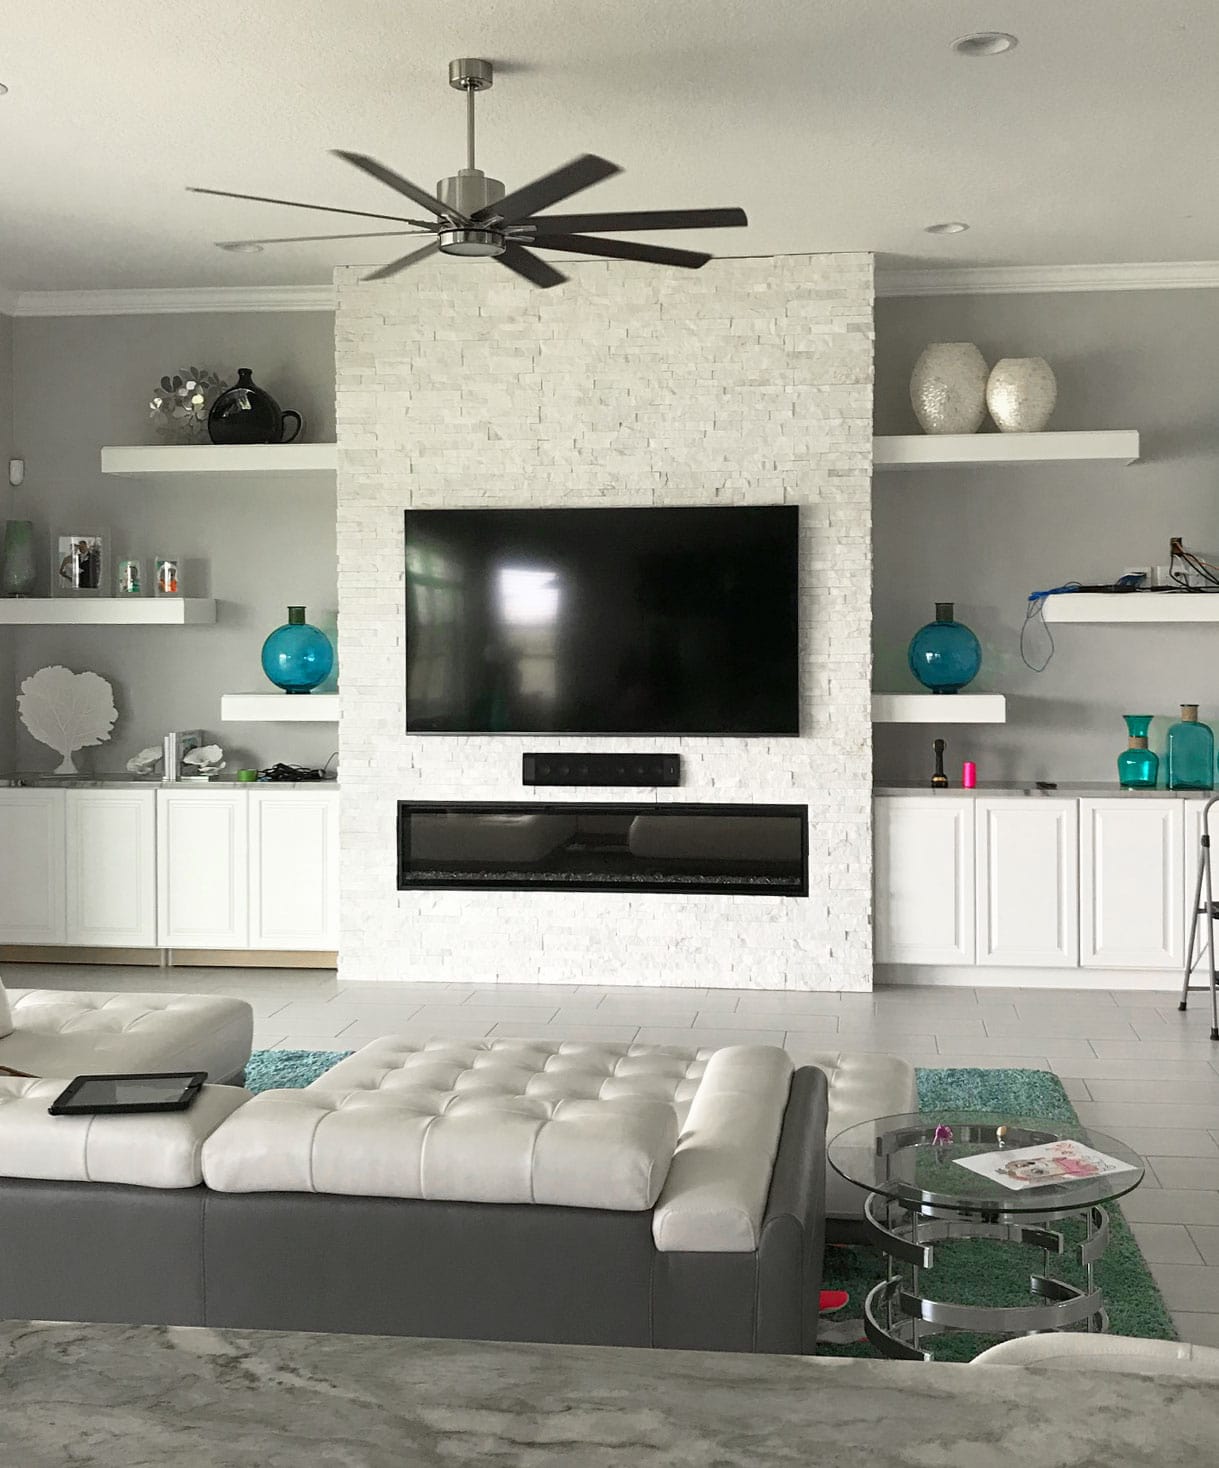 White Stacked Stone on a fireplace in a modern living room was a very popular trend in the summer of 2019